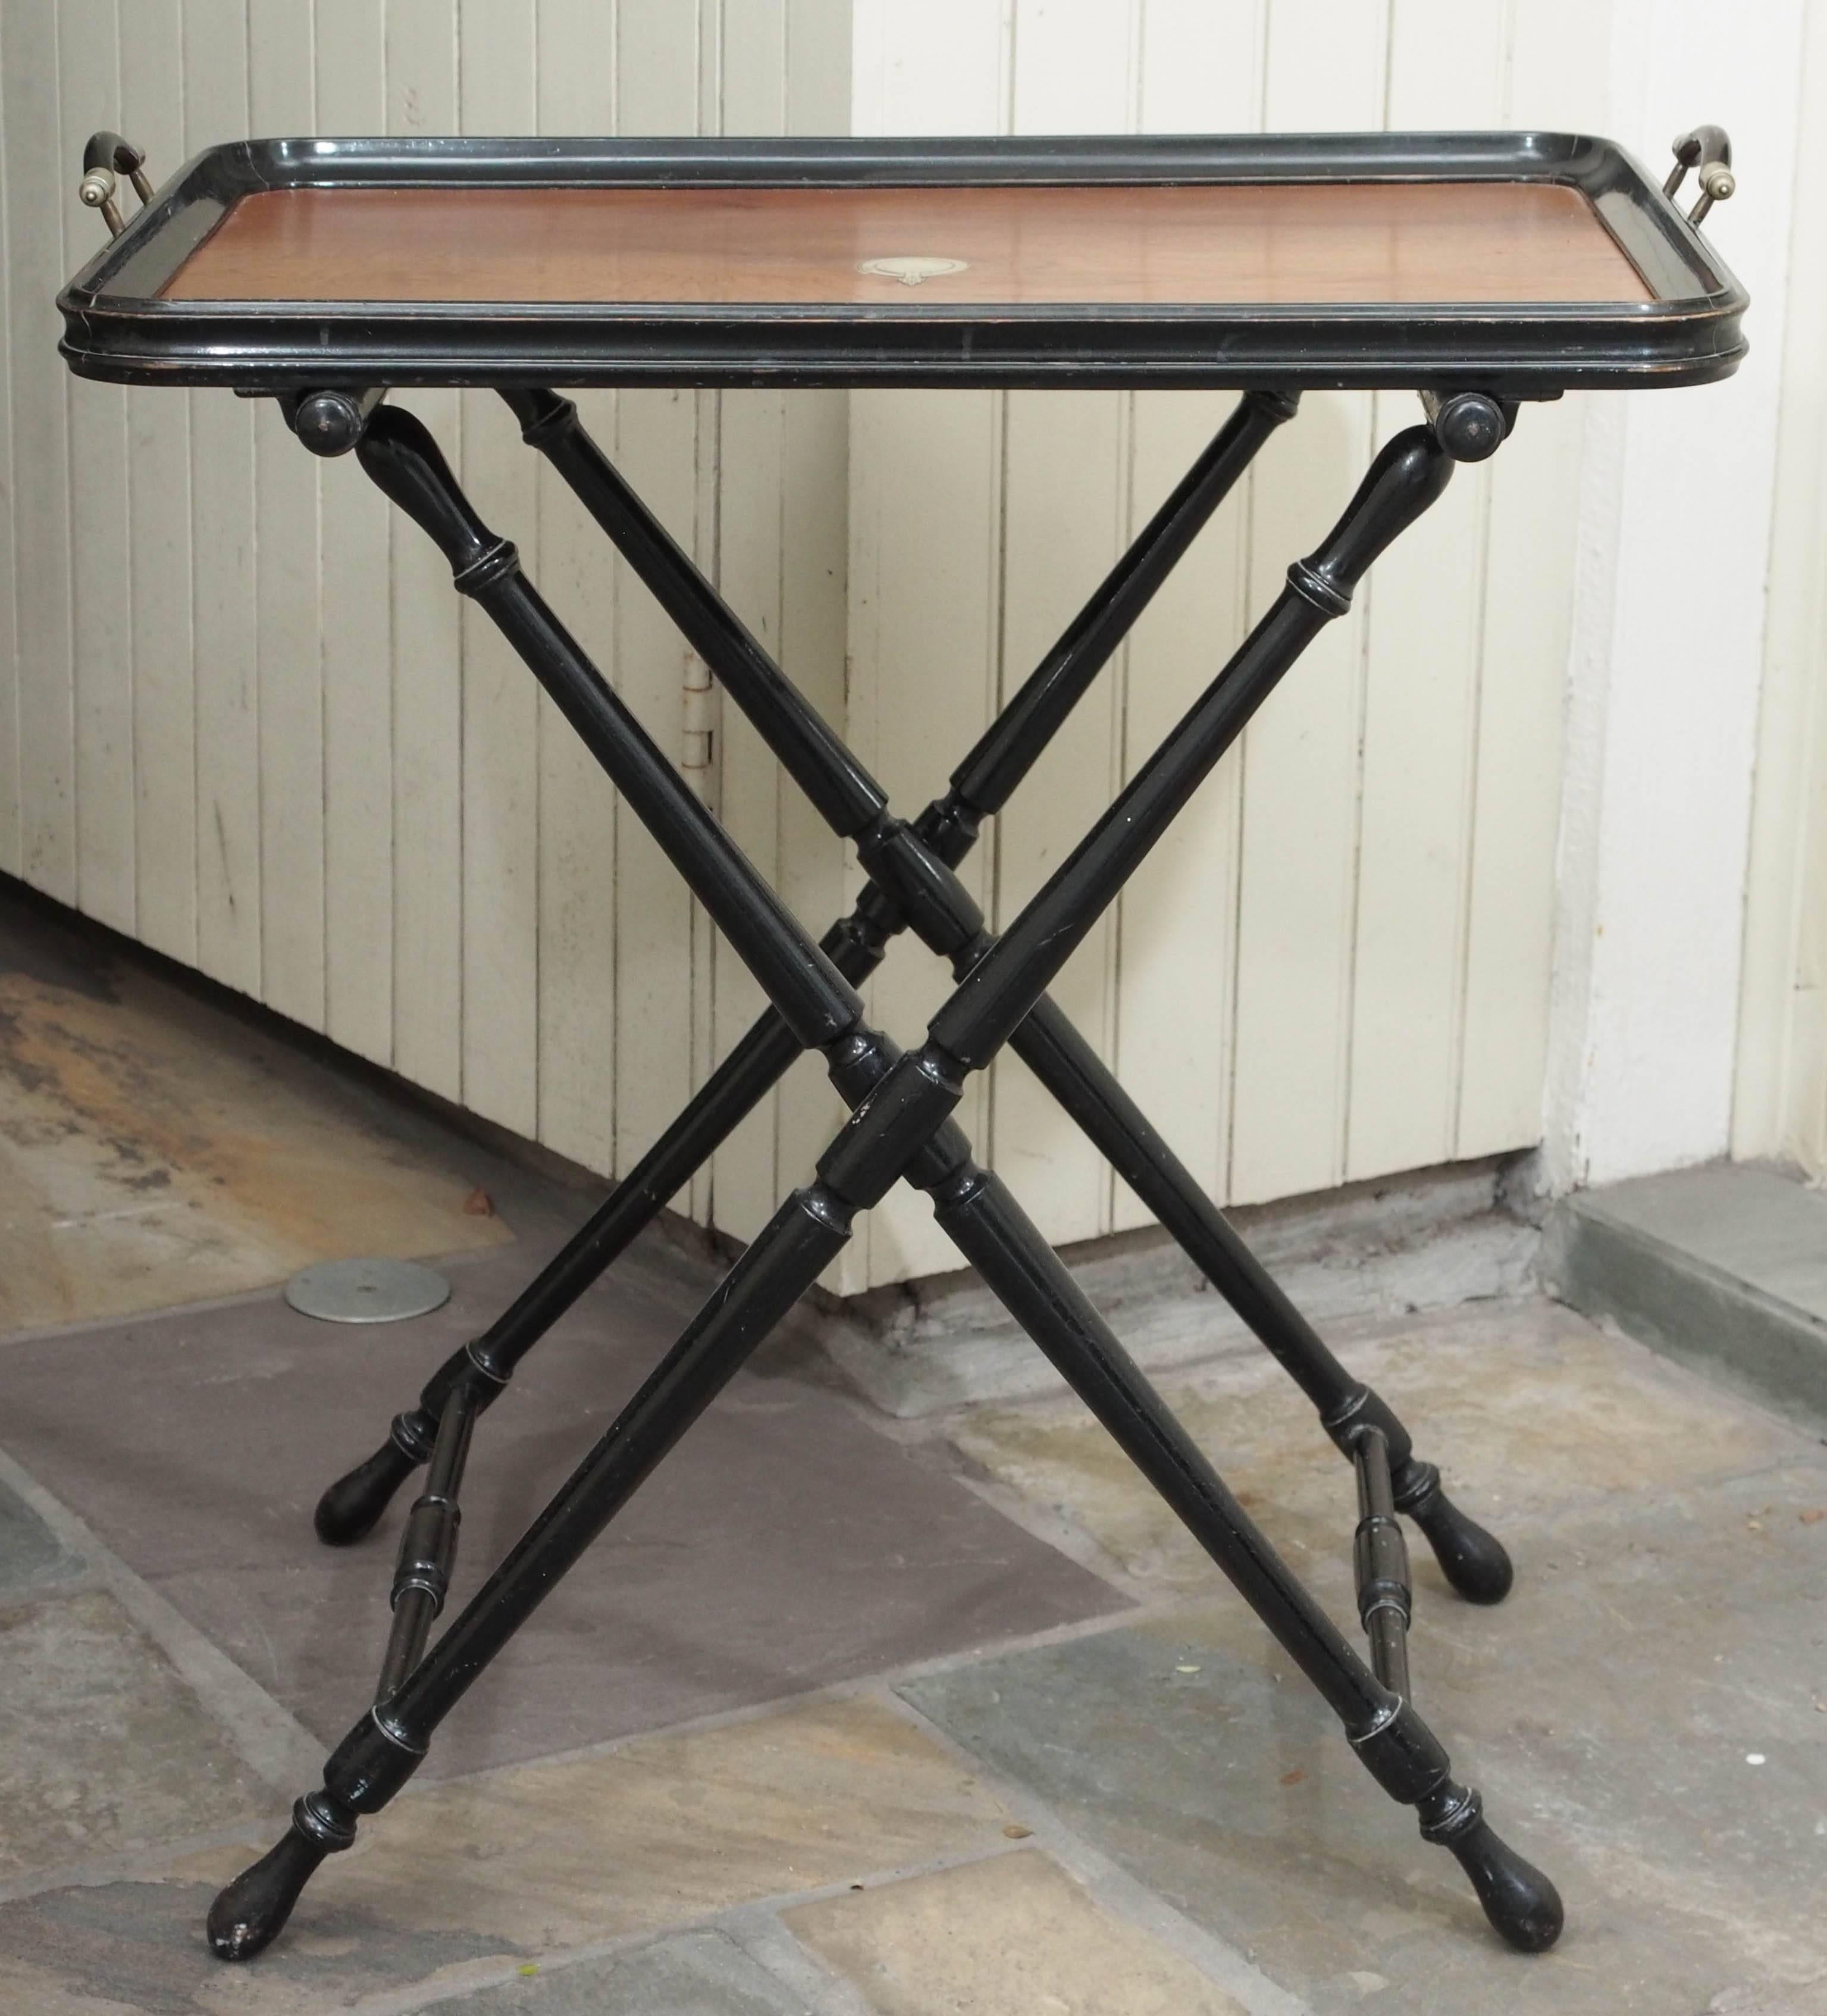 Butler's tray, French, circa 1900. Wood with ebonized trim. Tray is 19 inches by 27 inches with brass medallion in center, set on turned, ebonized trestle legs. Will fold for storage.